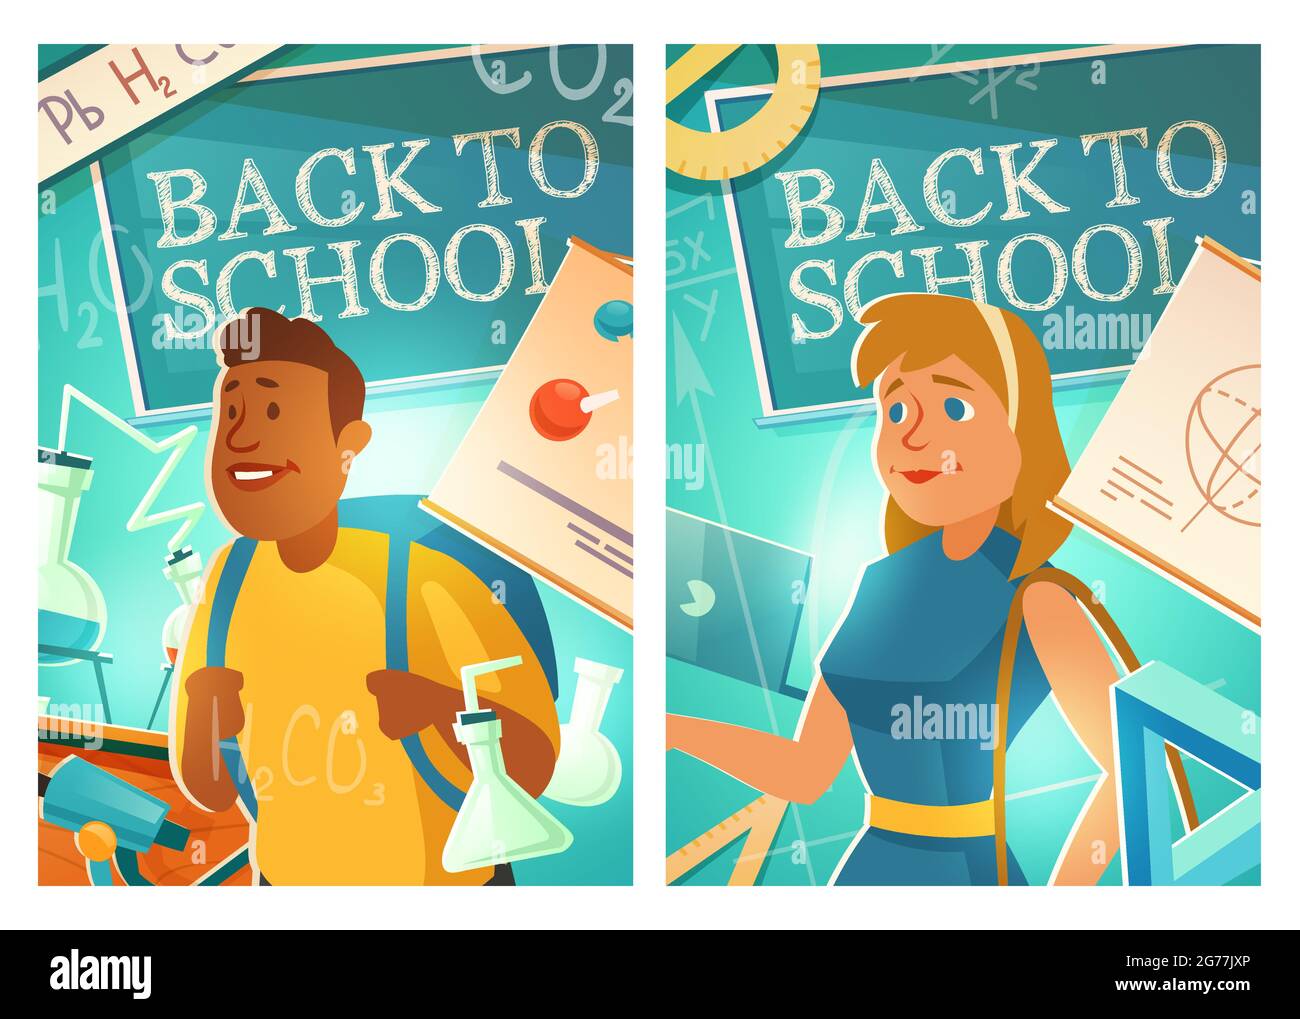 Back to school cartoon posters with girl and boy students wearing schoolbags stand in classroom with blackboard, chemistry and mathematics studying equipment. Education, knowledge vector illustration Stock Vector